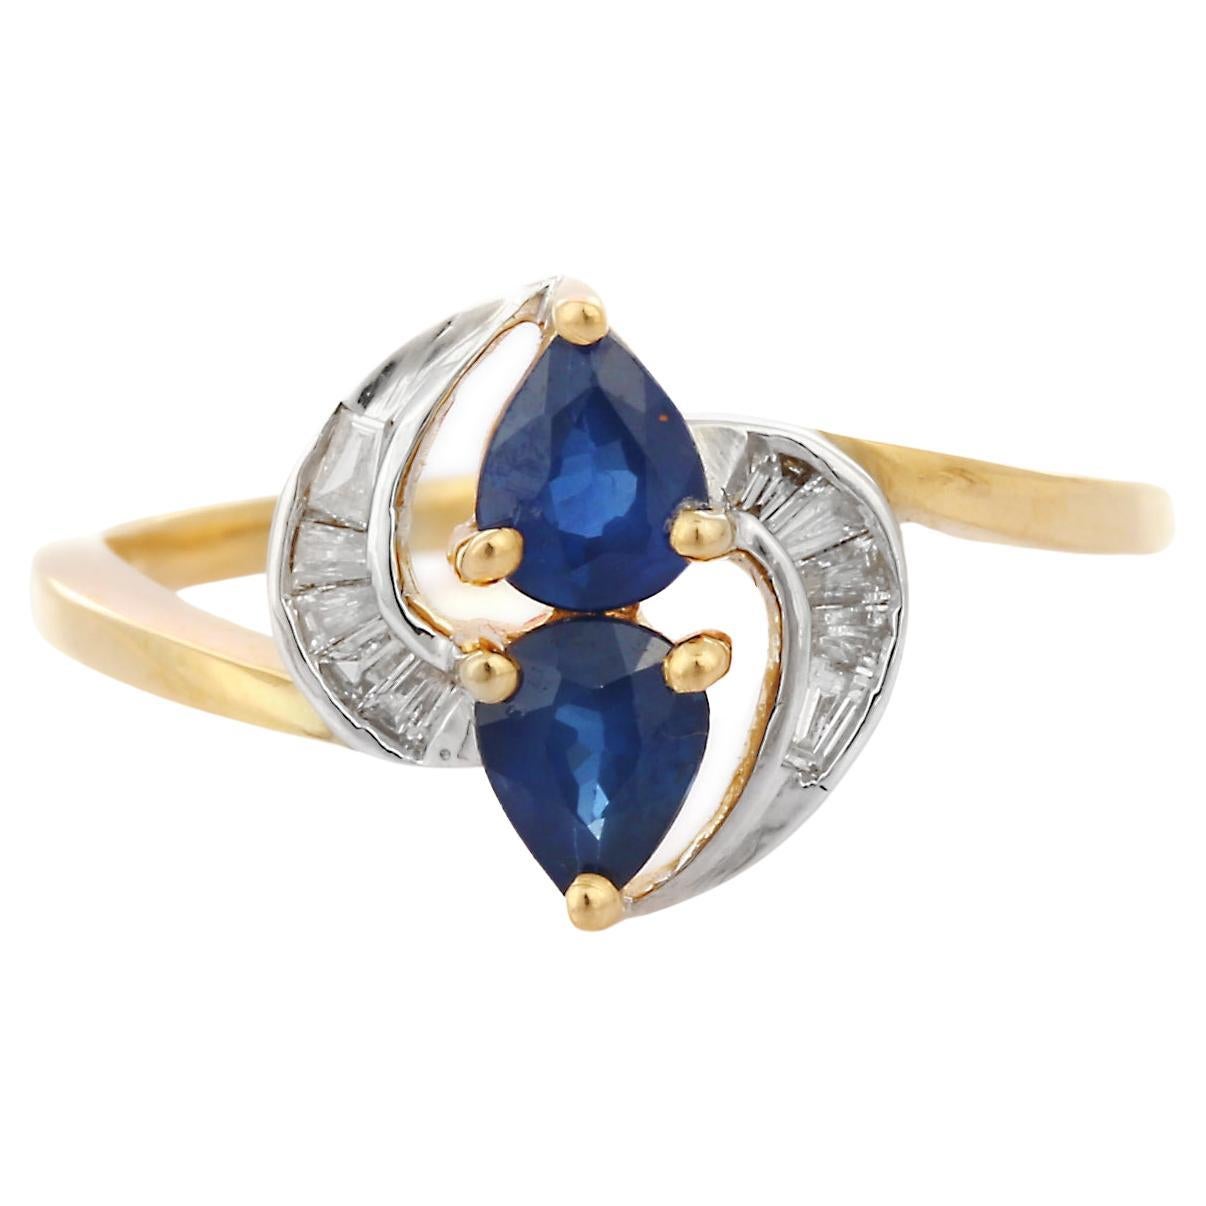 For Sale:  Natural Blue Sapphire Bridal Ring in 18K Yellow Gold with Diamonds